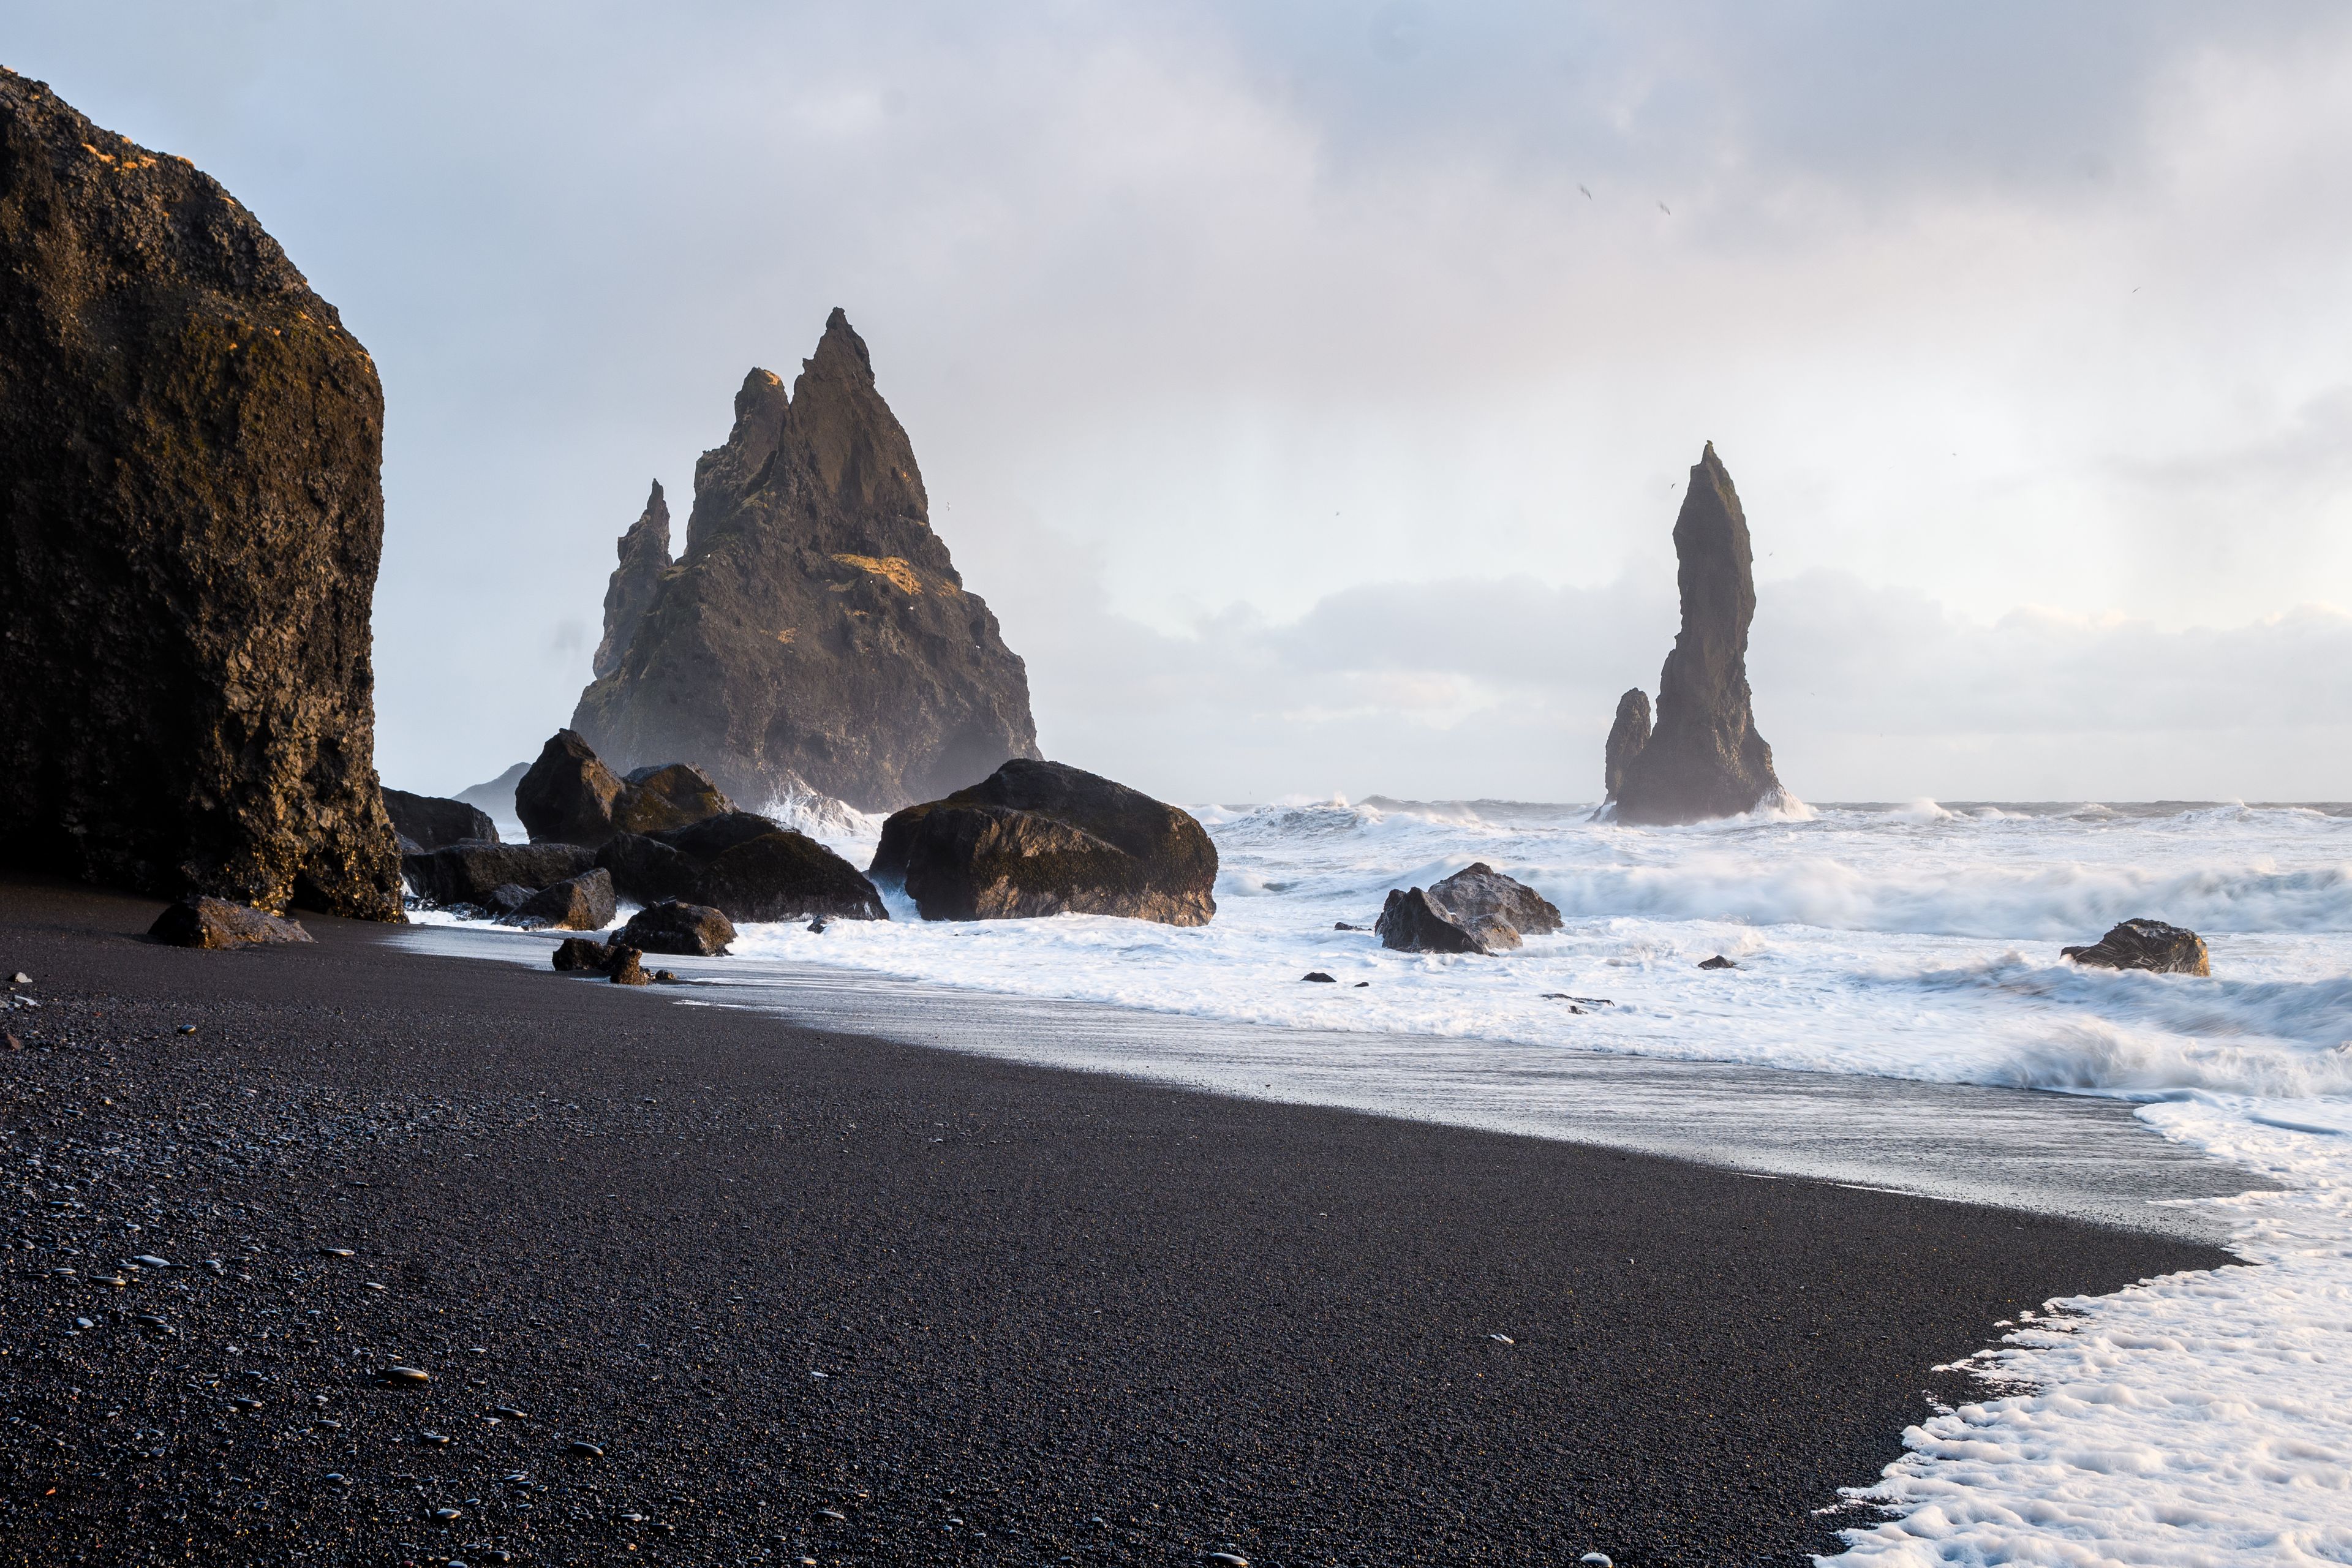 sneaker waves on reynisfjara black sand beach on iceland's south coast with black volcanic rock on the left side